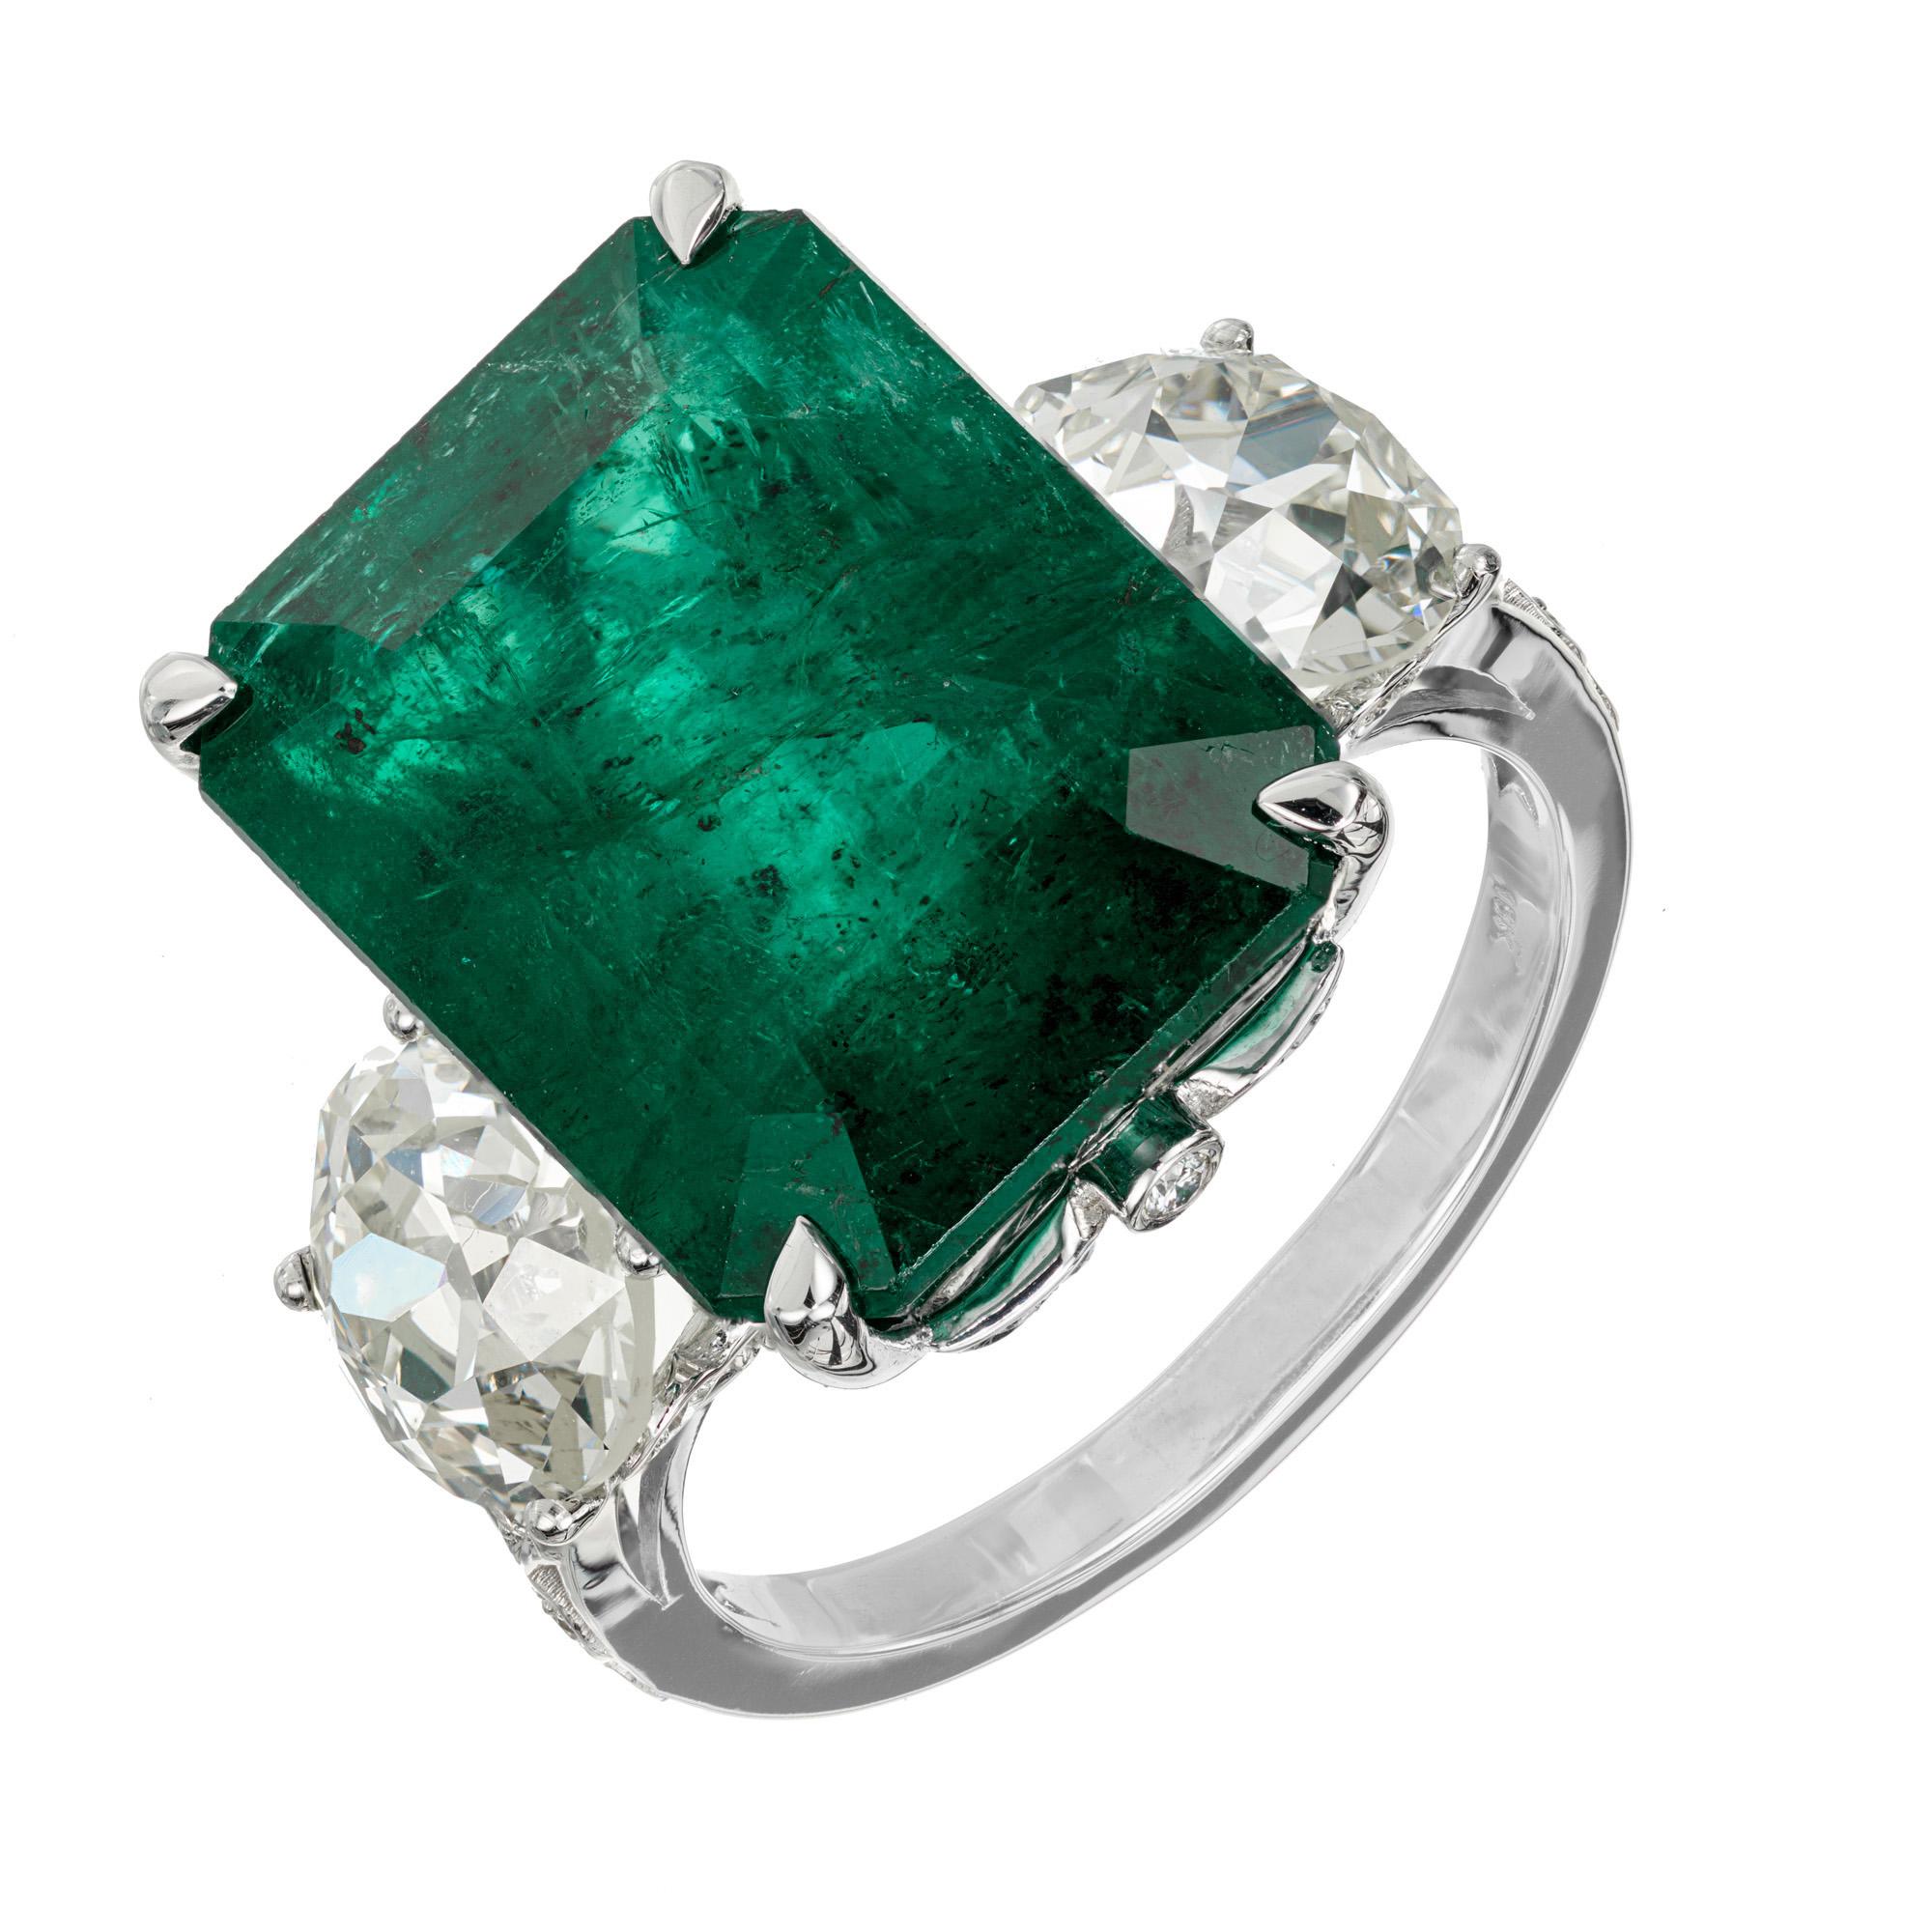 Awe inspiring 11.89 genuine emerald and diamond ring. GIA certified natural 11.89ct emerald with moderate clarity in a 18k white gold three-stone setting with 2 GIA certified old European round cut side diamonds totaling 3.10cts. The original